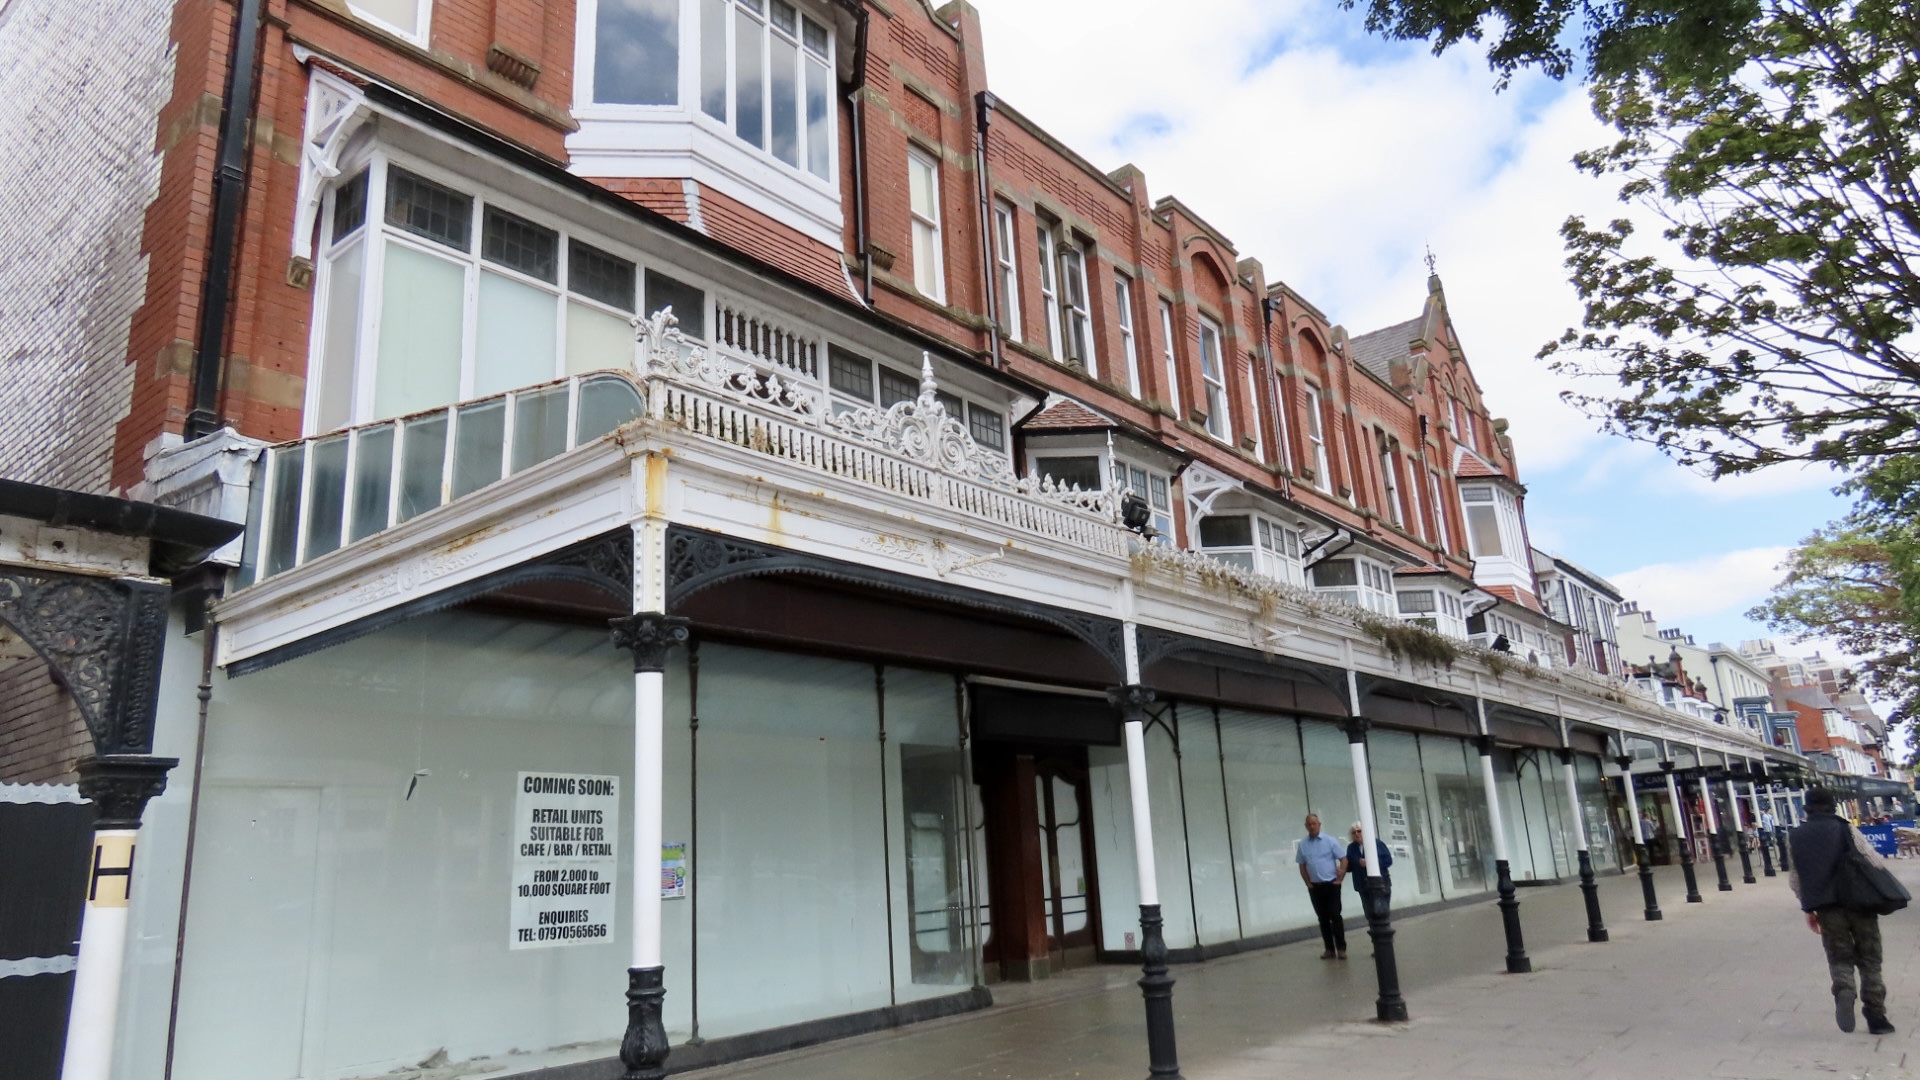 The former Debenhams building on Lord Street in Southport. Photo by Andrew Brown Stand Up For Southport